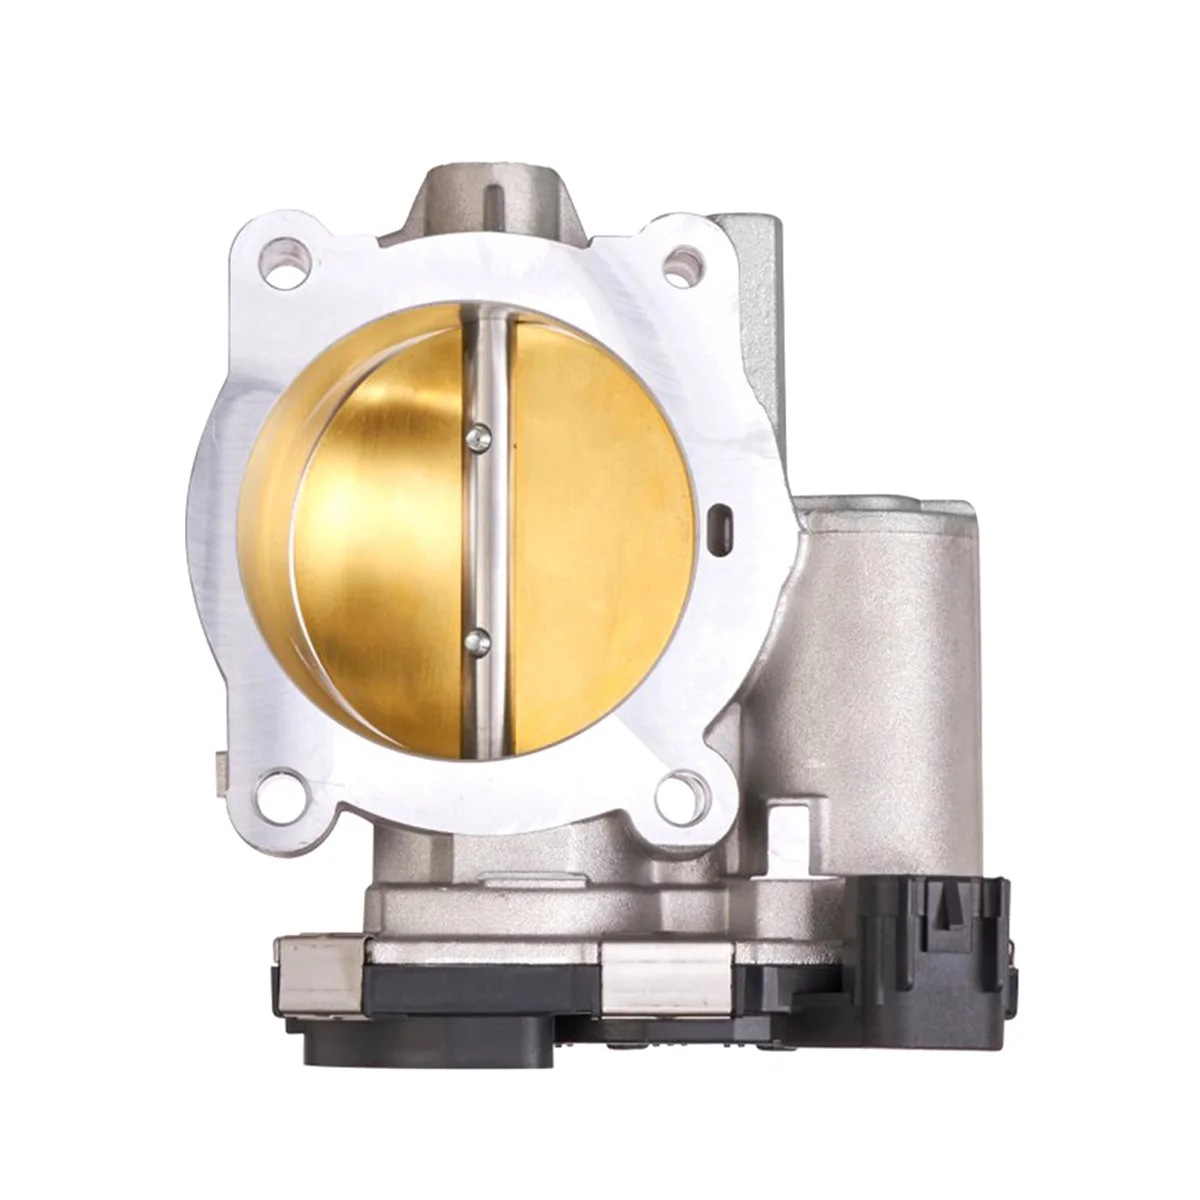 

12616994 Throttle Assembly Throttle Body Auto for Buick Cadillac CTS SRX Camaro Chevrolet Chevrolet GMC 3.0L 3.6L